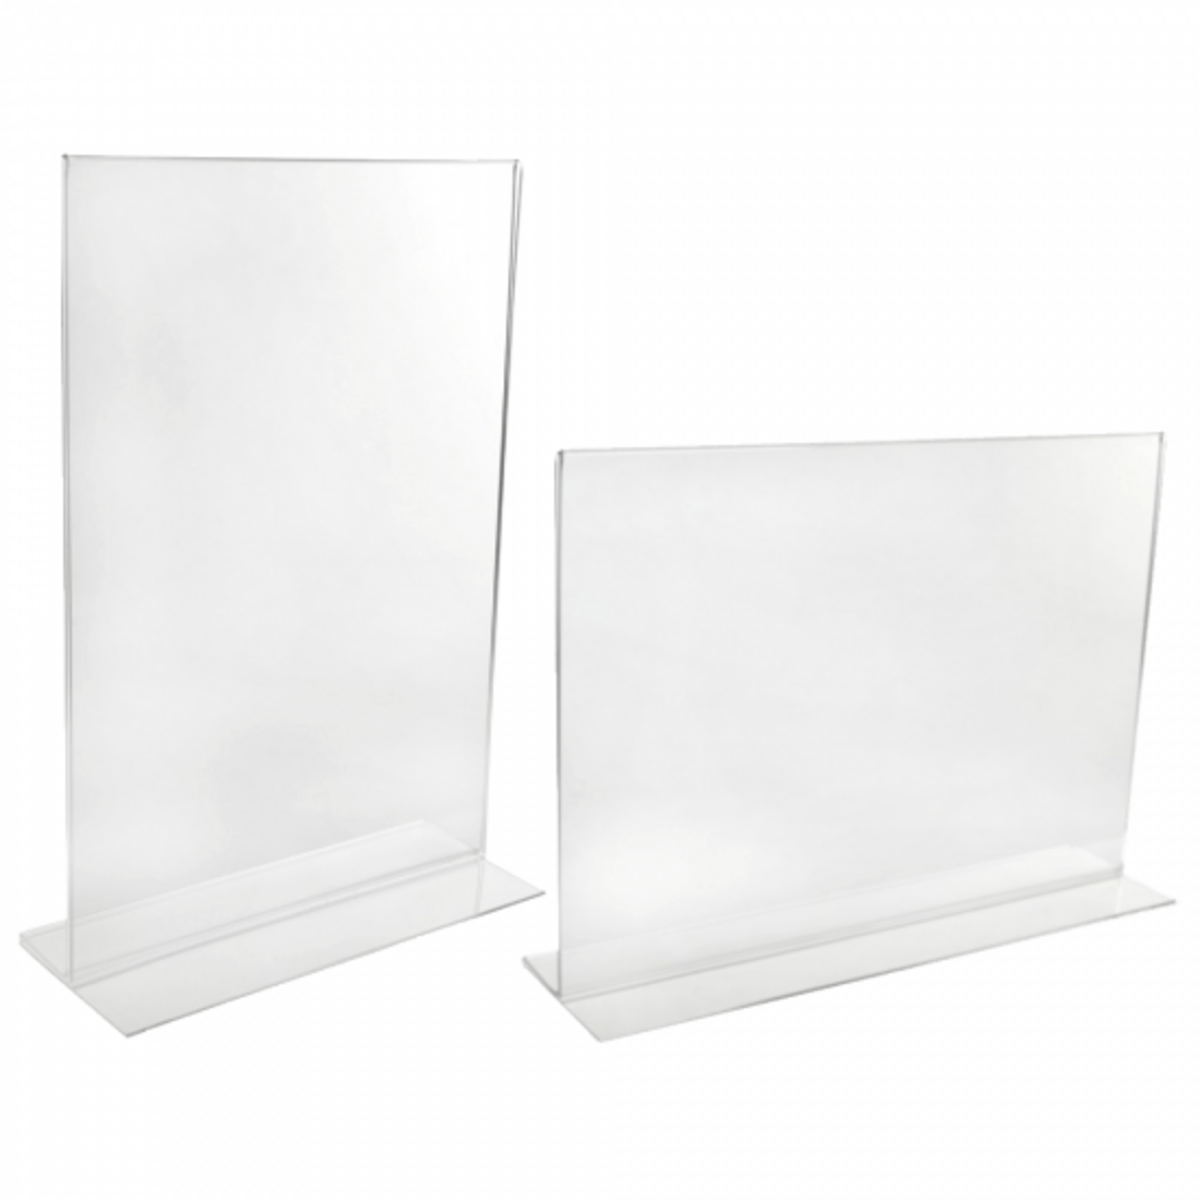 Free Standing Double Sided Portrait Acrylic Poster Holder.png